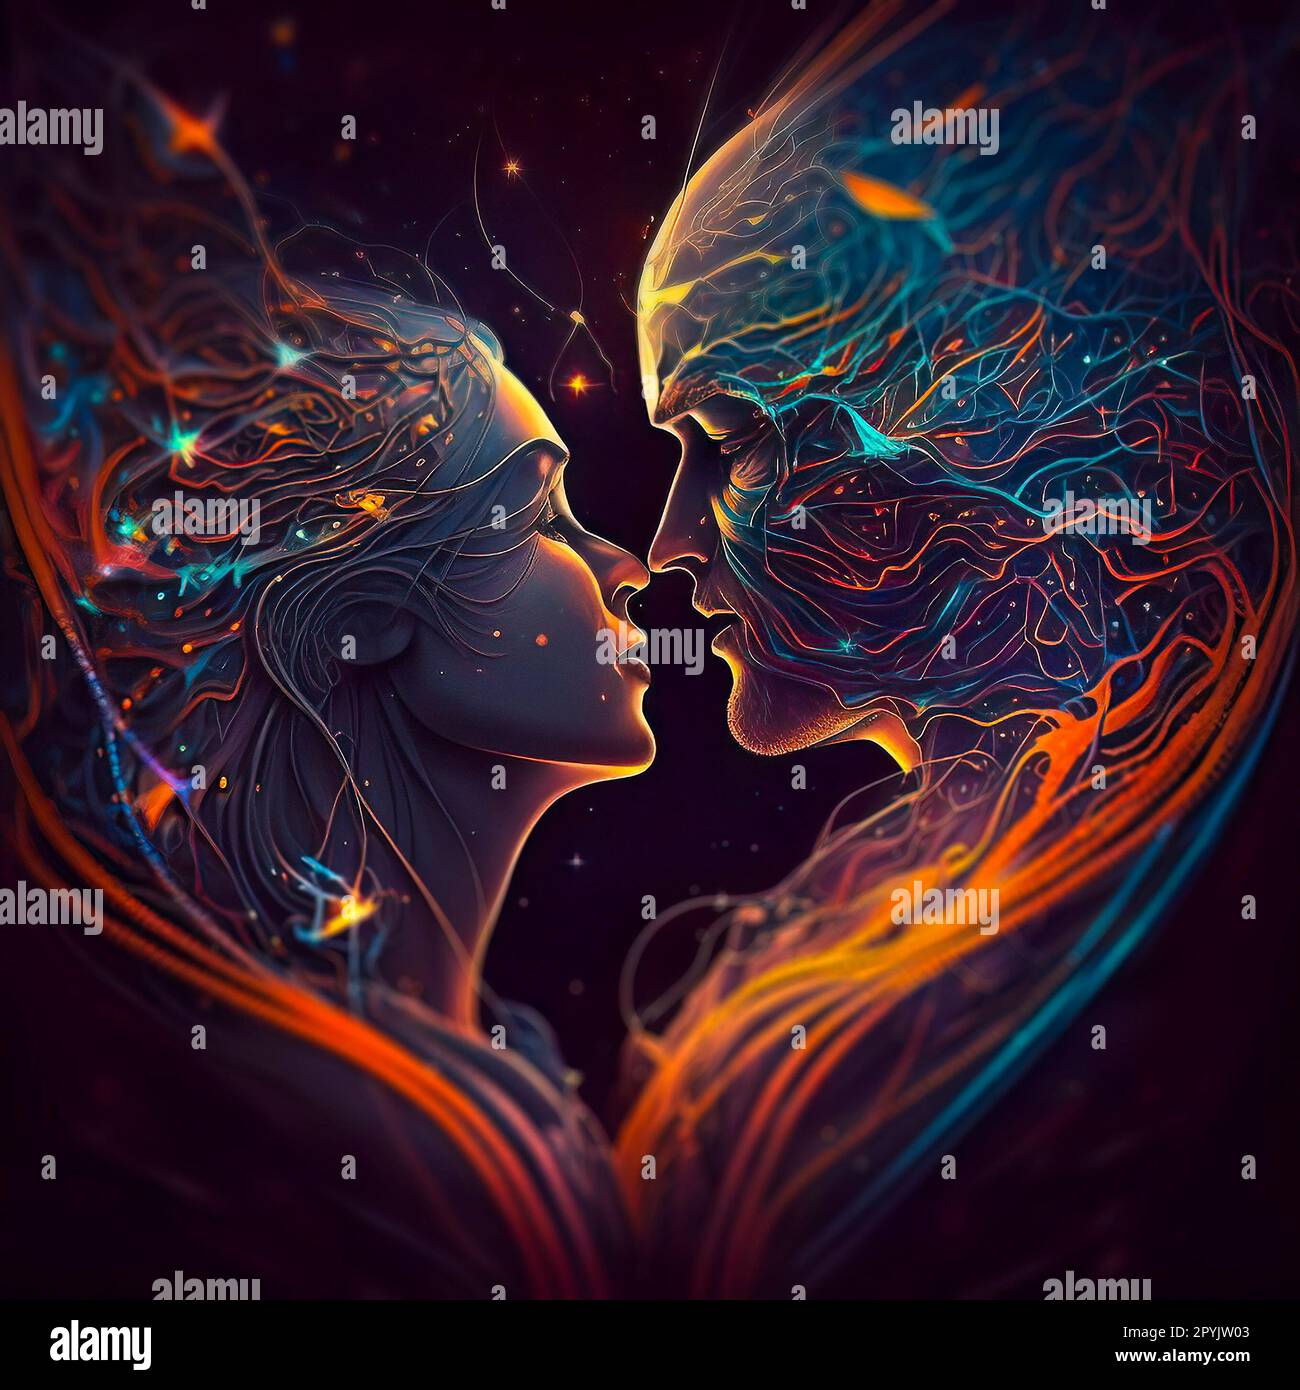 Vibrant Cosmic Fantasy Art of a Loving Couple made of Intricate Illuminated Lines, Connected by a Neural Network with Glowing Light Stock Photo